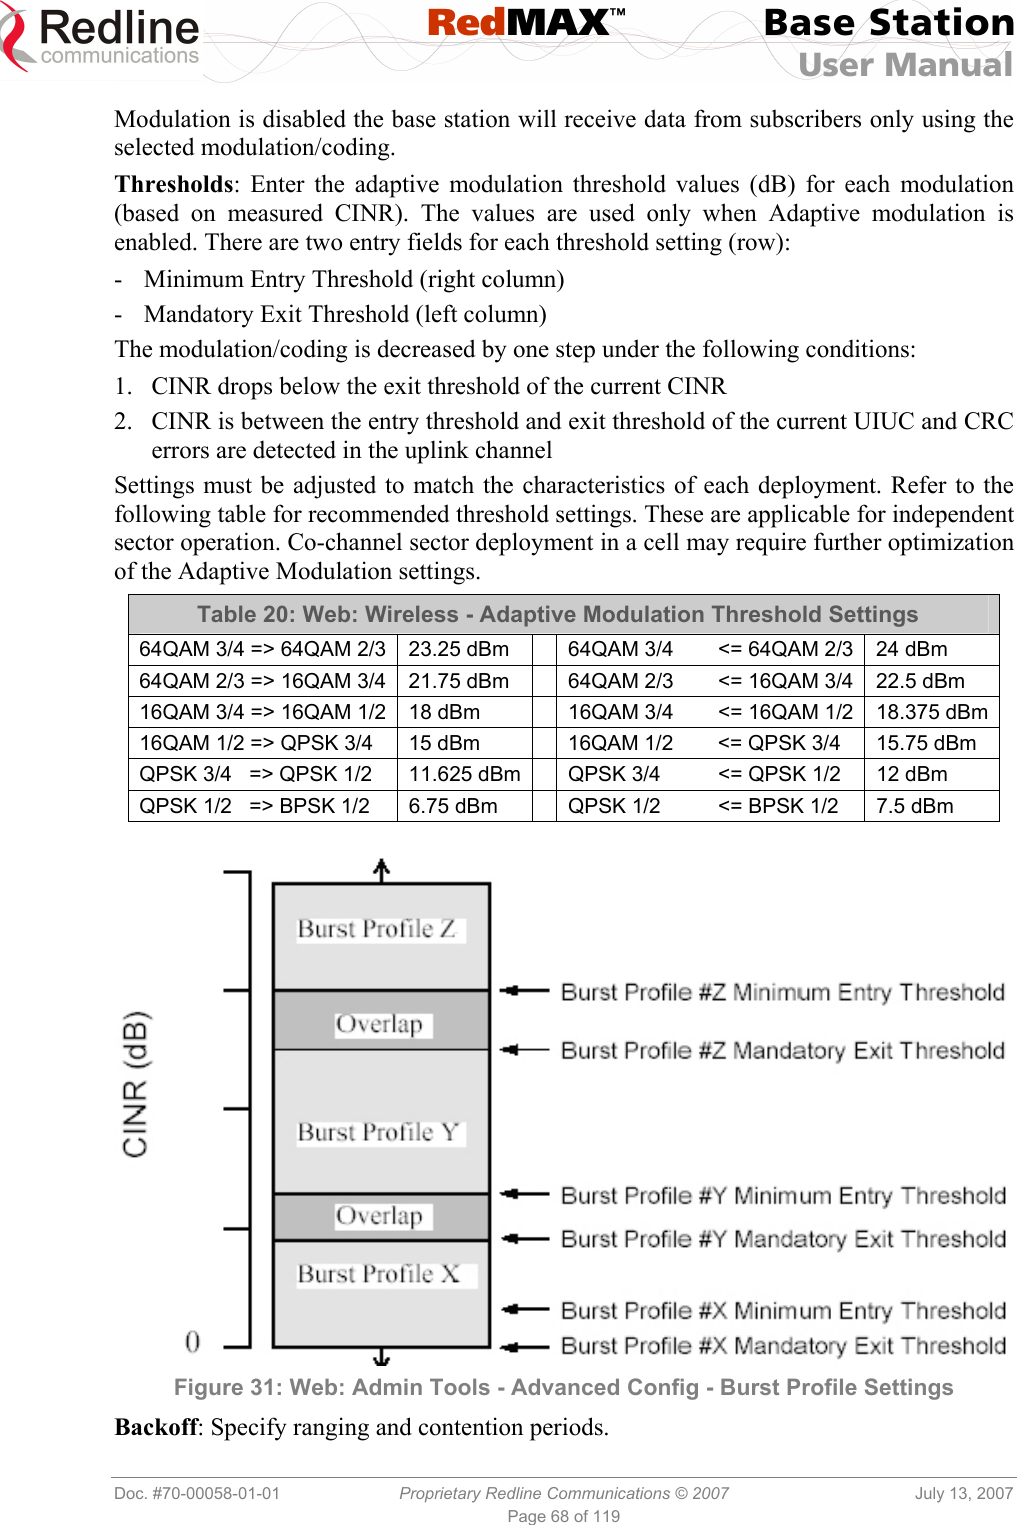  RedMAX™ Base Station User Manual   Doc. #70-00058-01-01  Proprietary Redline Communications © 2007  July 13, 2007 Page 68 of 119 Modulation is disabled the base station will receive data from subscribers only using the selected modulation/coding. Thresholds: Enter the adaptive modulation threshold values (dB) for each modulation (based on measured CINR). The values are used only when Adaptive modulation is enabled. There are two entry fields for each threshold setting (row): -  Minimum Entry Threshold (right column) -  Mandatory Exit Threshold (left column) The modulation/coding is decreased by one step under the following conditions: 1.  CINR drops below the exit threshold of the current CINR 2.  CINR is between the entry threshold and exit threshold of the current UIUC and CRC errors are detected in the uplink channel Settings must be adjusted to match the characteristics of each deployment. Refer to the following table for recommended threshold settings. These are applicable for independent sector operation. Co-channel sector deployment in a cell may require further optimization of the Adaptive Modulation settings. Table 20: Web: Wireless - Adaptive Modulation Threshold Settings 64QAM 3/4 =&gt; 64QAM 2/3  23.25 dBm    64QAM 3/4  &lt;= 64QAM 2/3   24 dBm 64QAM 2/3 =&gt; 16QAM 3/4   21.75 dBm    64QAM 2/3  &lt;= 16QAM 3/4   22.5 dBm 16QAM 3/4 =&gt; 16QAM 1/2   18 dBm    16QAM 3/4  &lt;= 16QAM 1/2   18.375 dBm16QAM 1/2 =&gt; QPSK 3/4  15 dBm    16QAM 1/2  &lt;= QPSK 3/4   15.75 dBm QPSK 3/4   =&gt; QPSK 1/2   11.625 dBm   QPSK 3/4    &lt;= QPSK 1/2   12 dBm QPSK 1/2   =&gt; BPSK 1/2   6.75 dBm    QPSK 1/2    &lt;= BPSK 1/2   7.5 dBm    Figure 31: Web: Admin Tools - Advanced Config - Burst Profile Settings Backoff: Specify ranging and contention periods.  